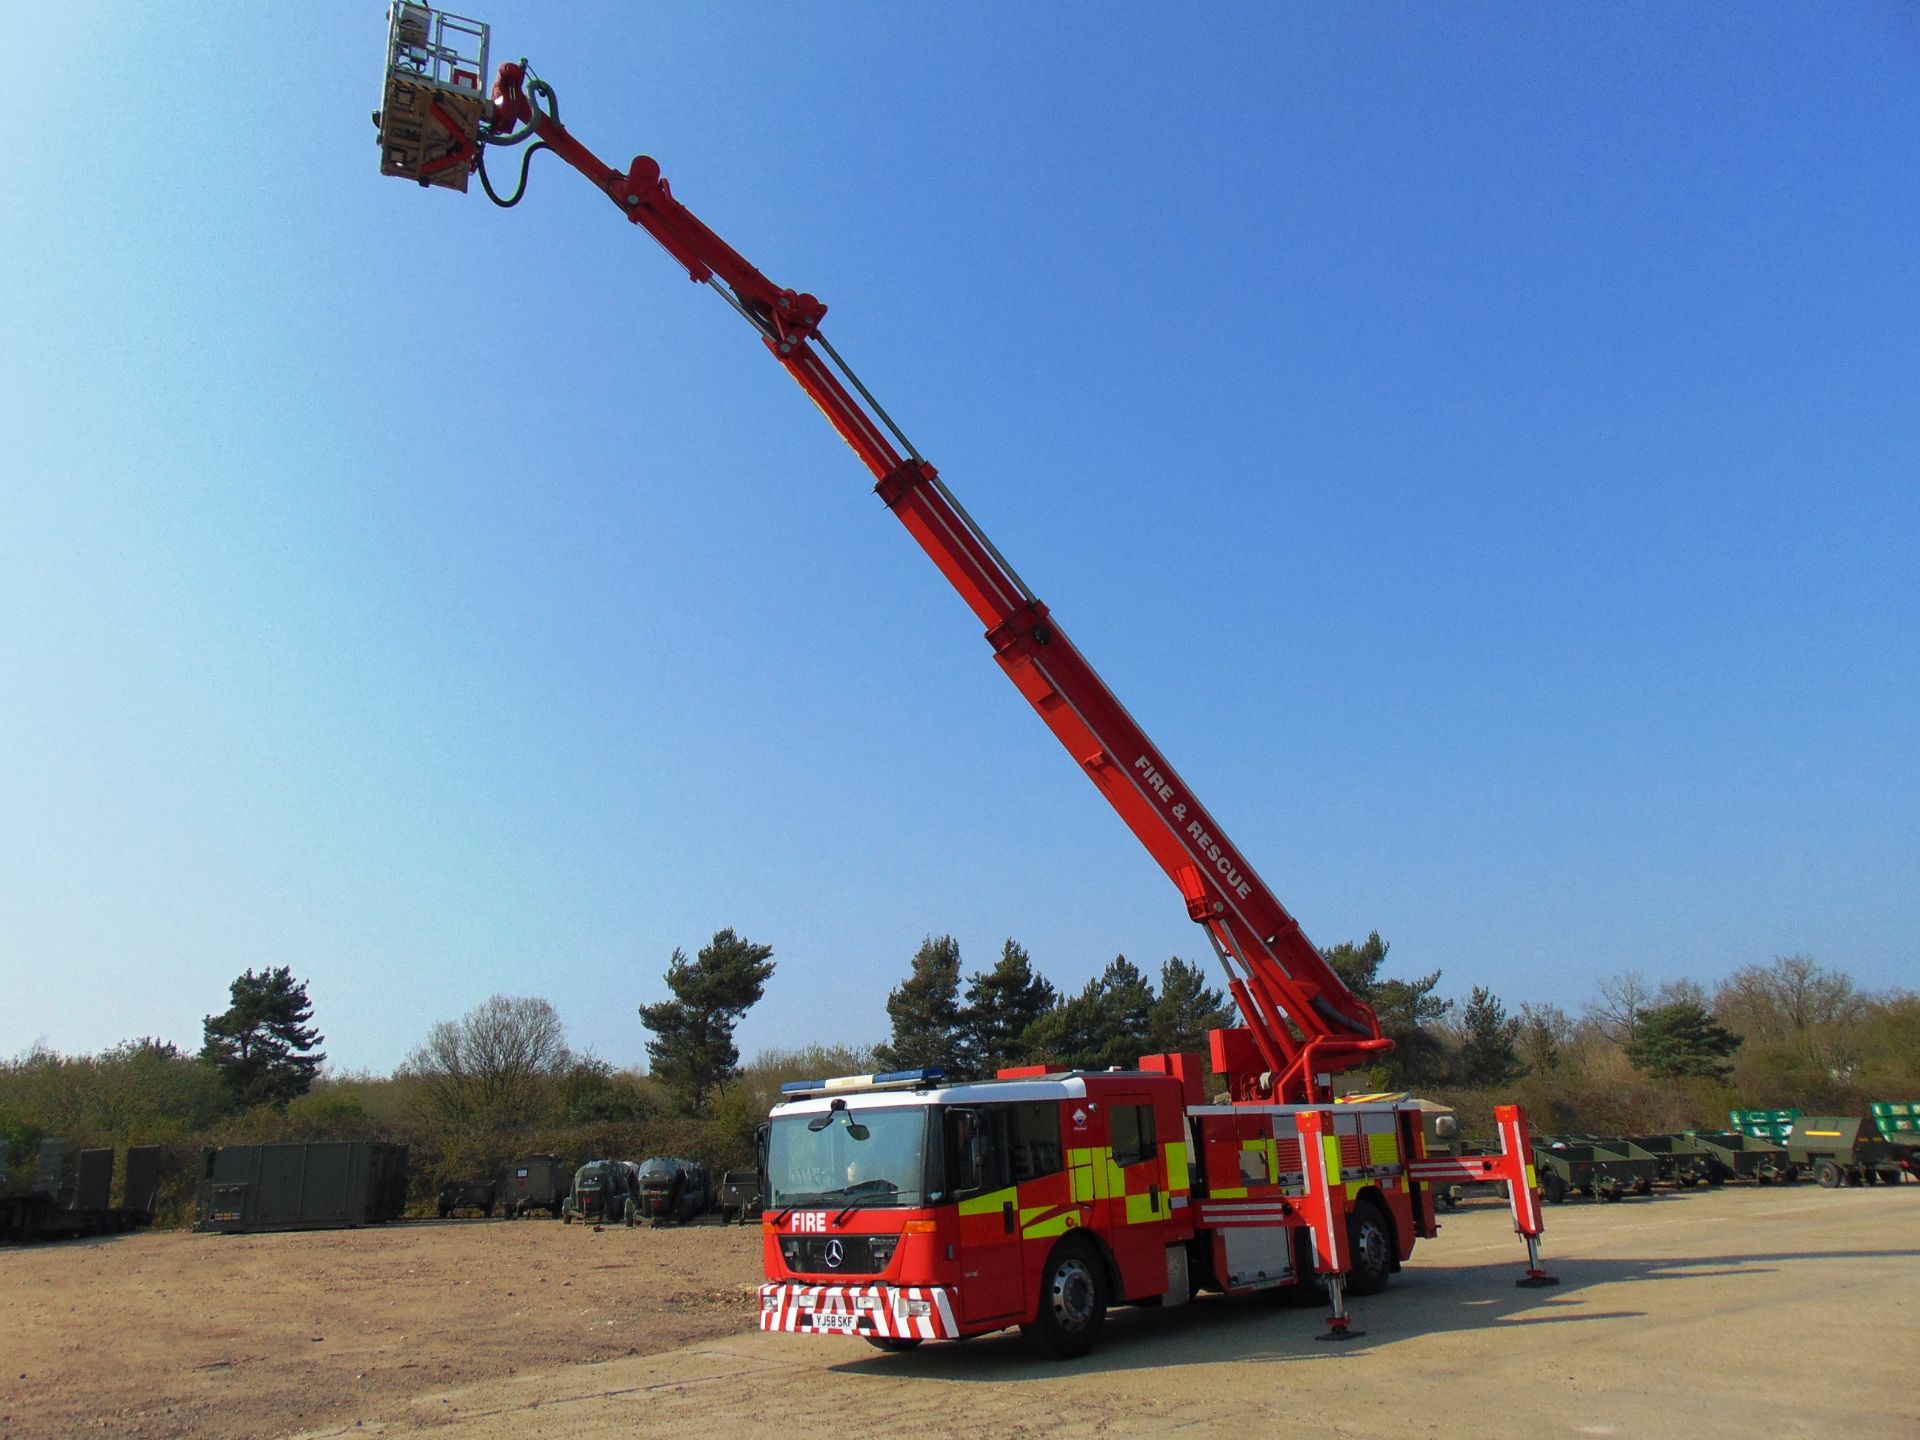 Mercedes Econic 2633 Aerial Rescue Fire Fighting Appliance - Image 9 of 57